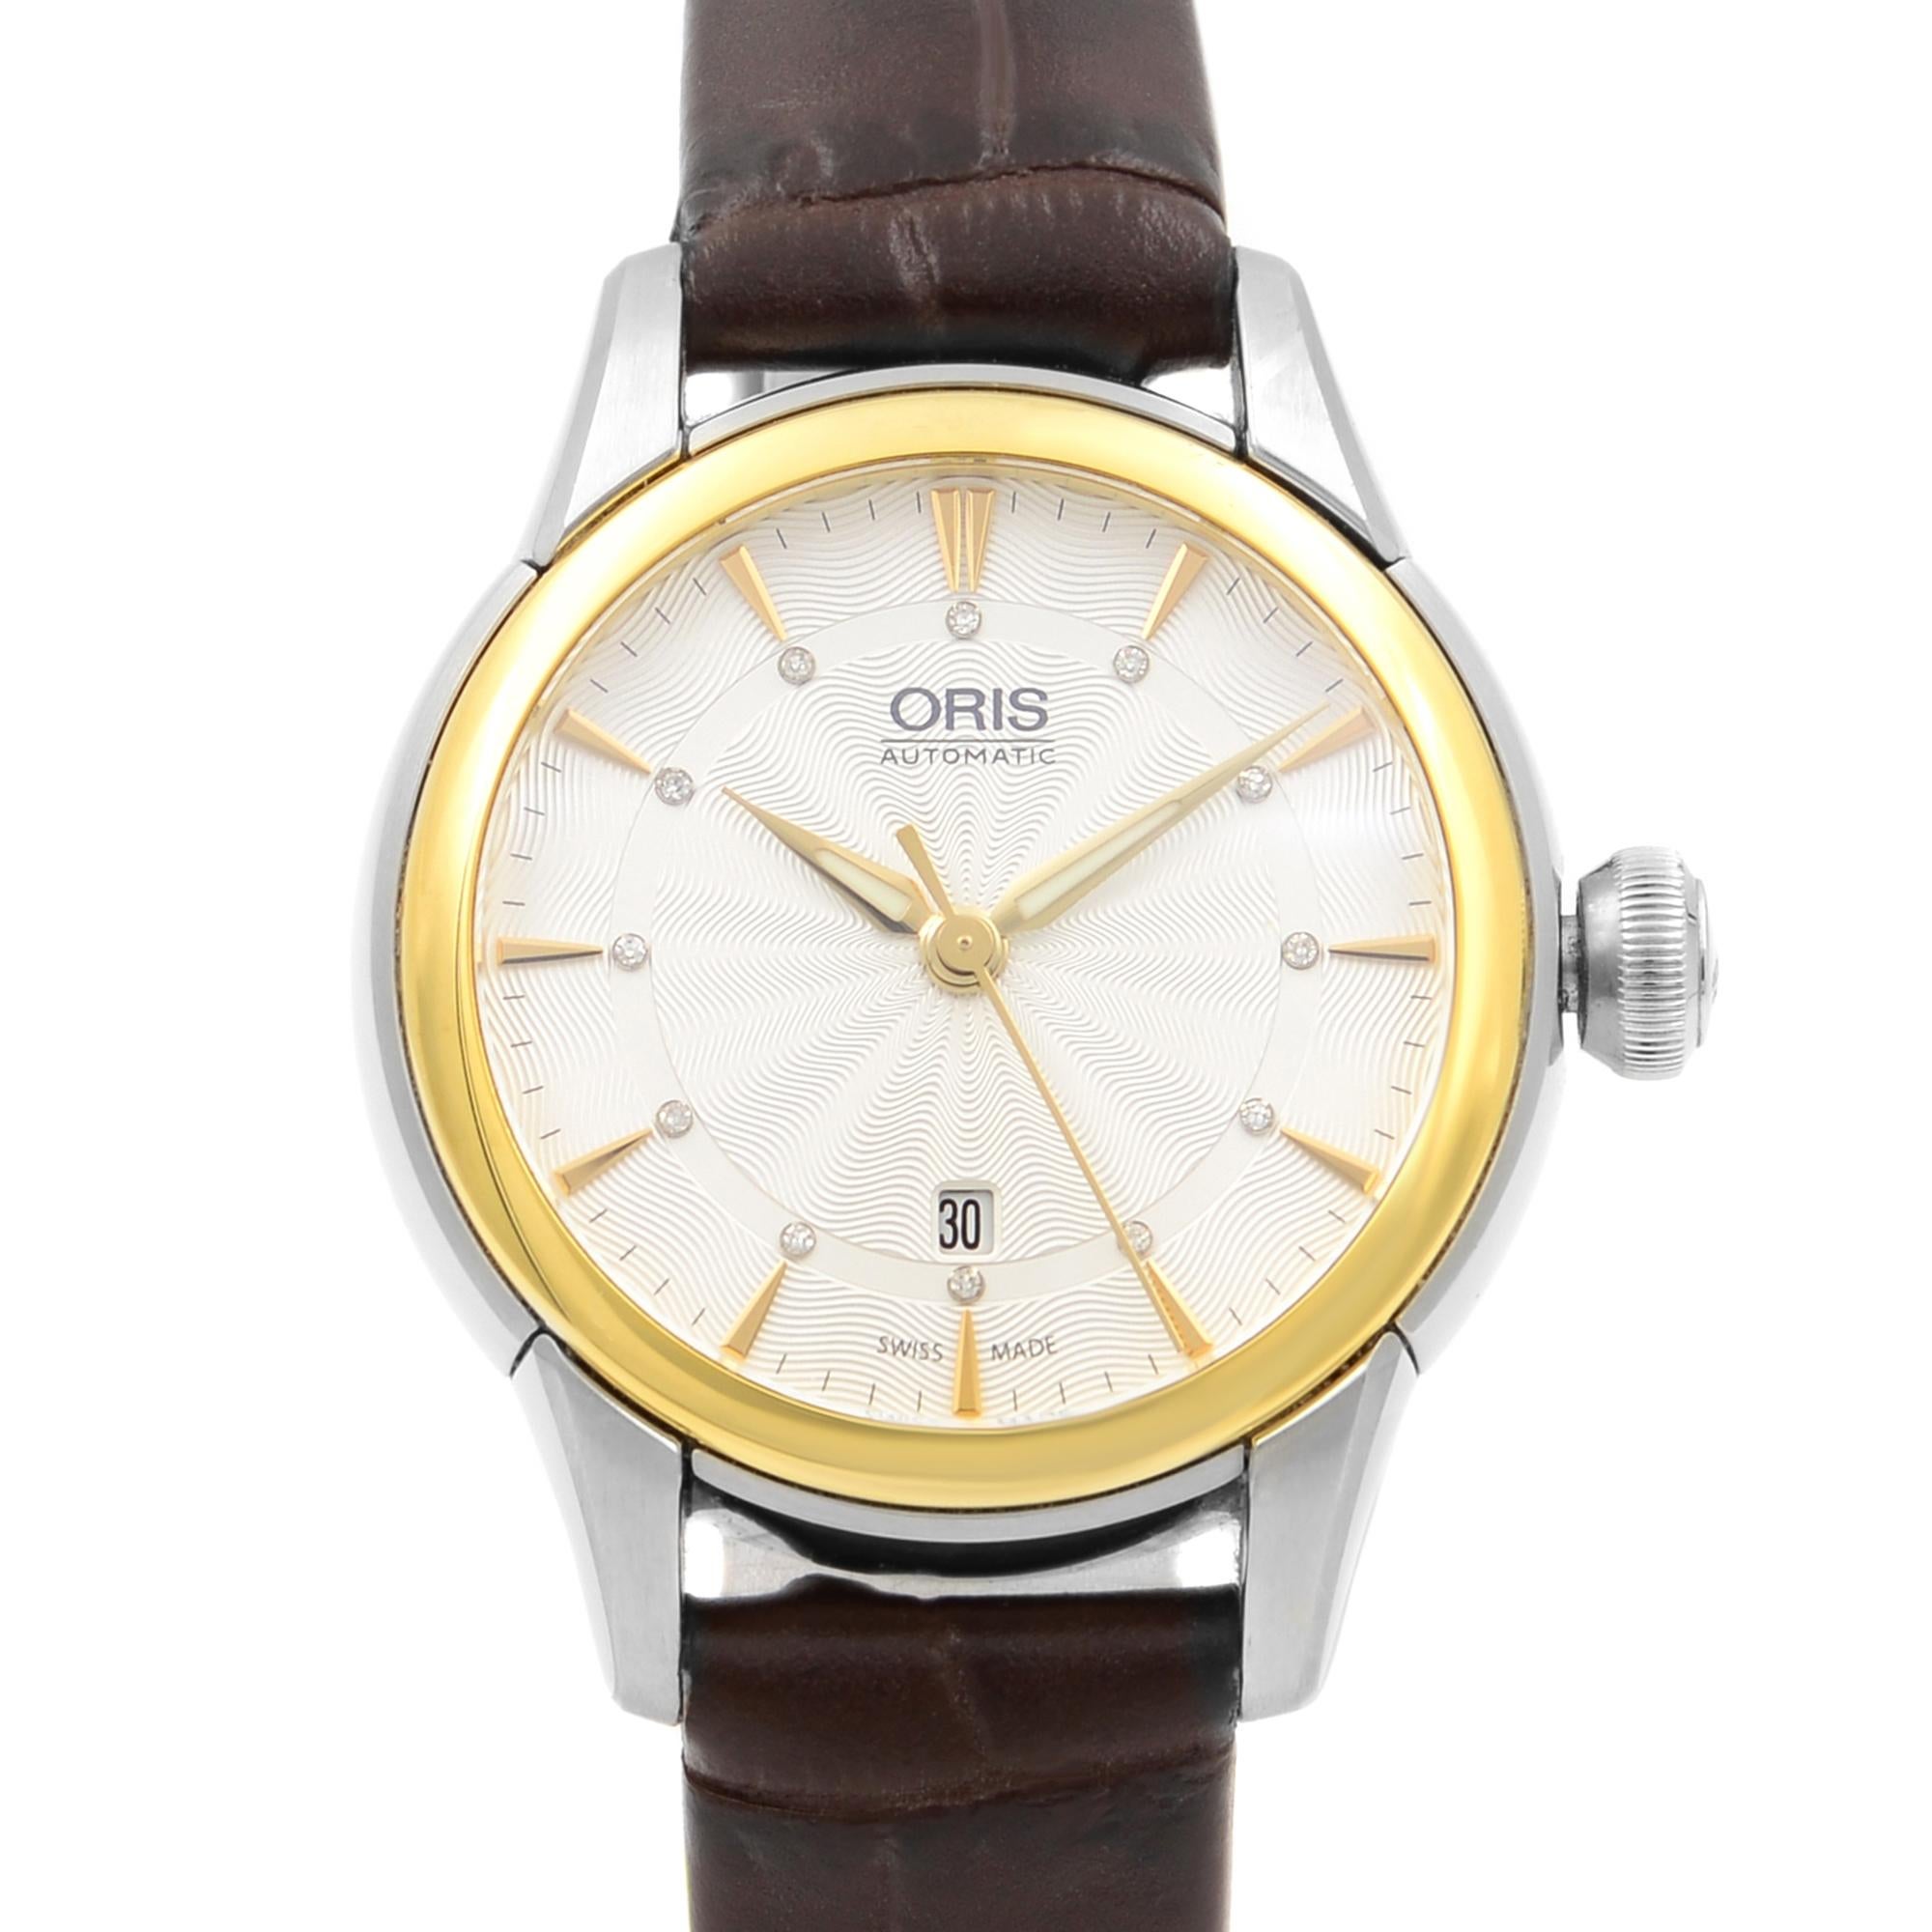 This pre-owned Oris Artelier 01 561 7687 4351-07 5 14 70FC is a beautiful Ladie's timepiece that is powered by mechanical (automatic) movement which is cased in a stainless steel case. It has a round shape face, date indicator dial and has hand